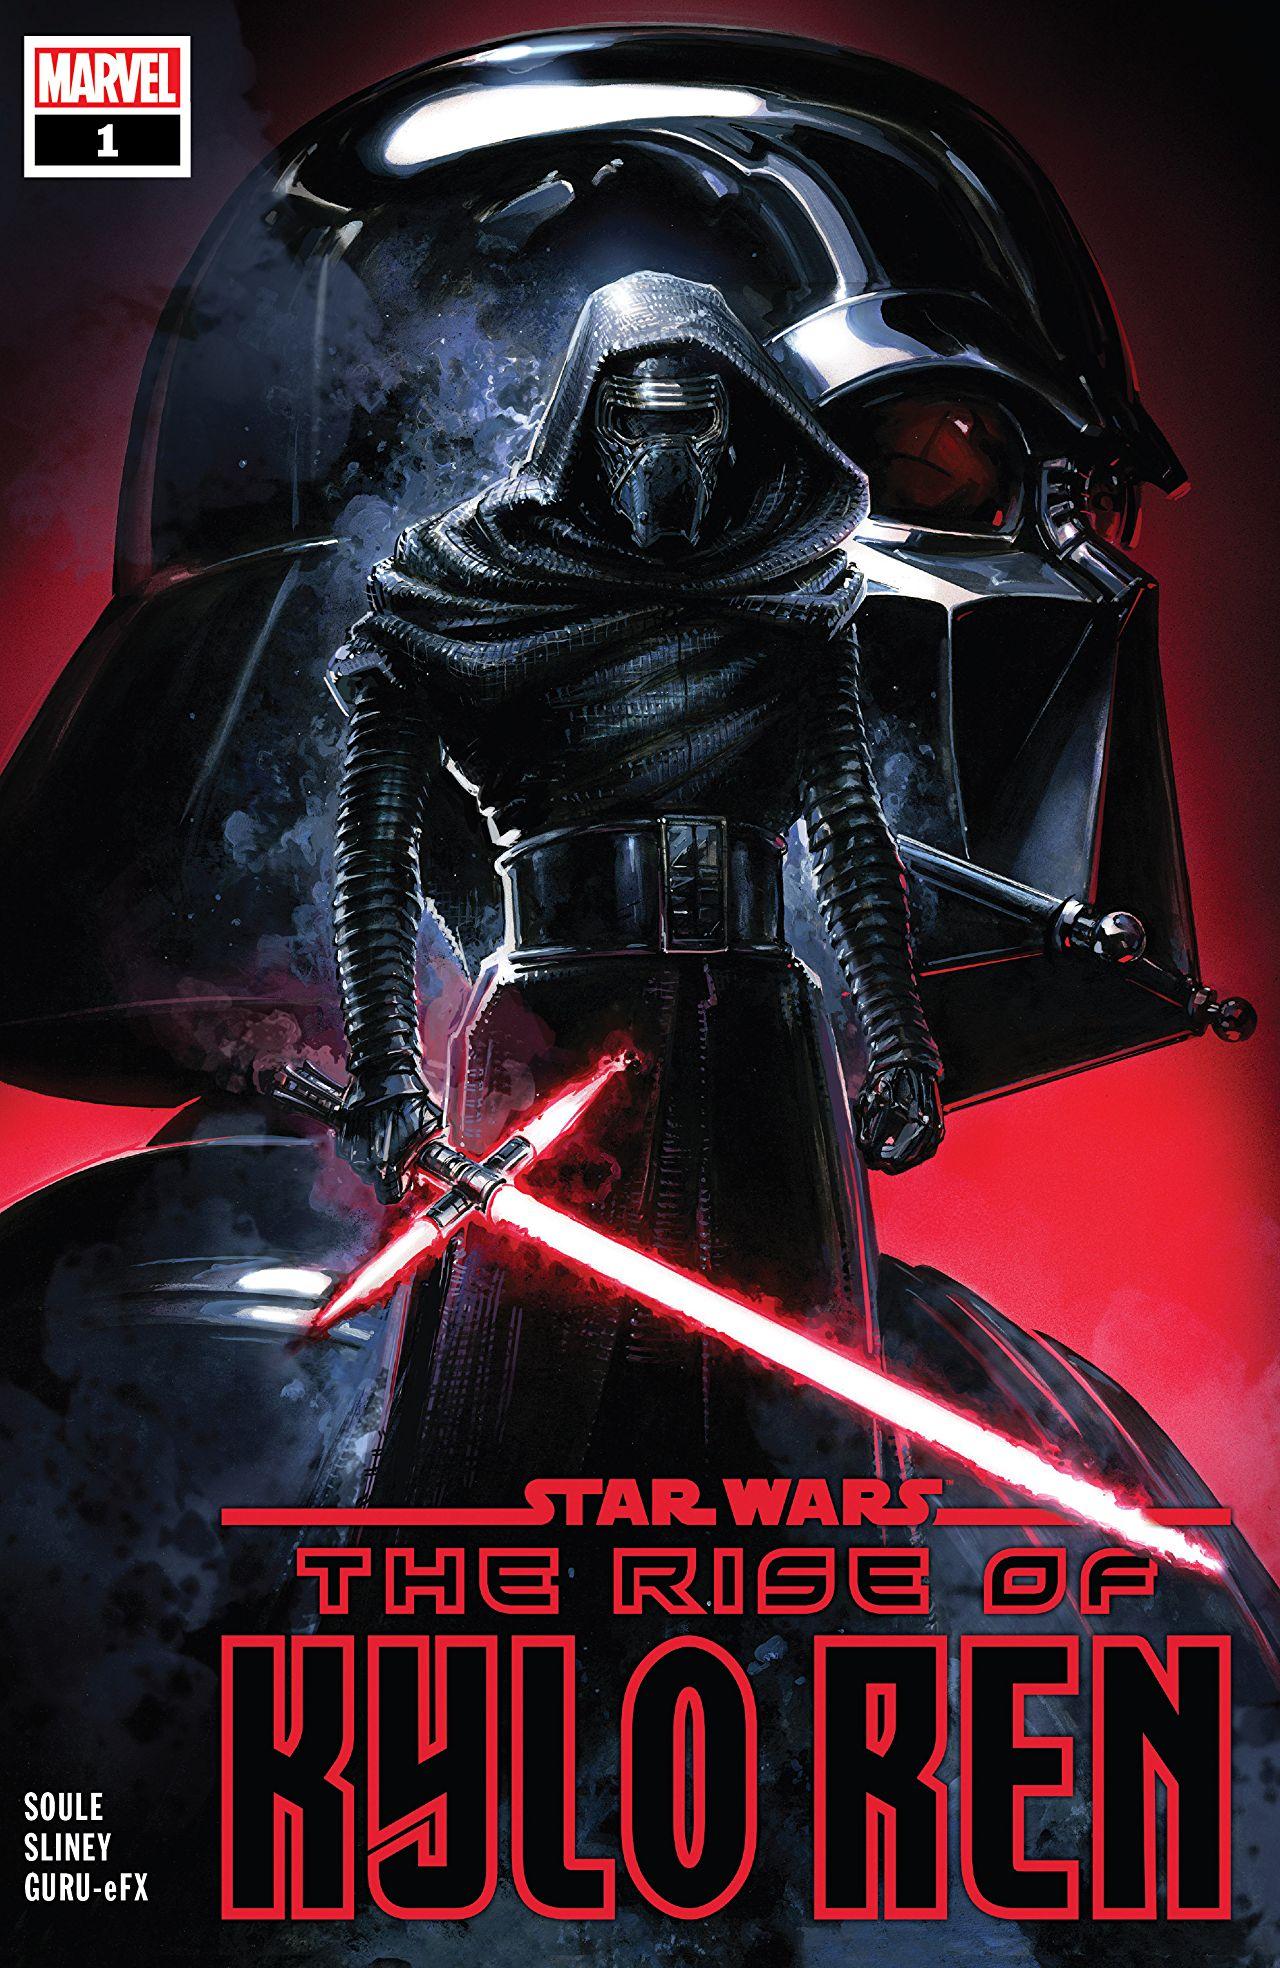 Star Wars: The Rise of Kylo Ren Vol. 1 #1